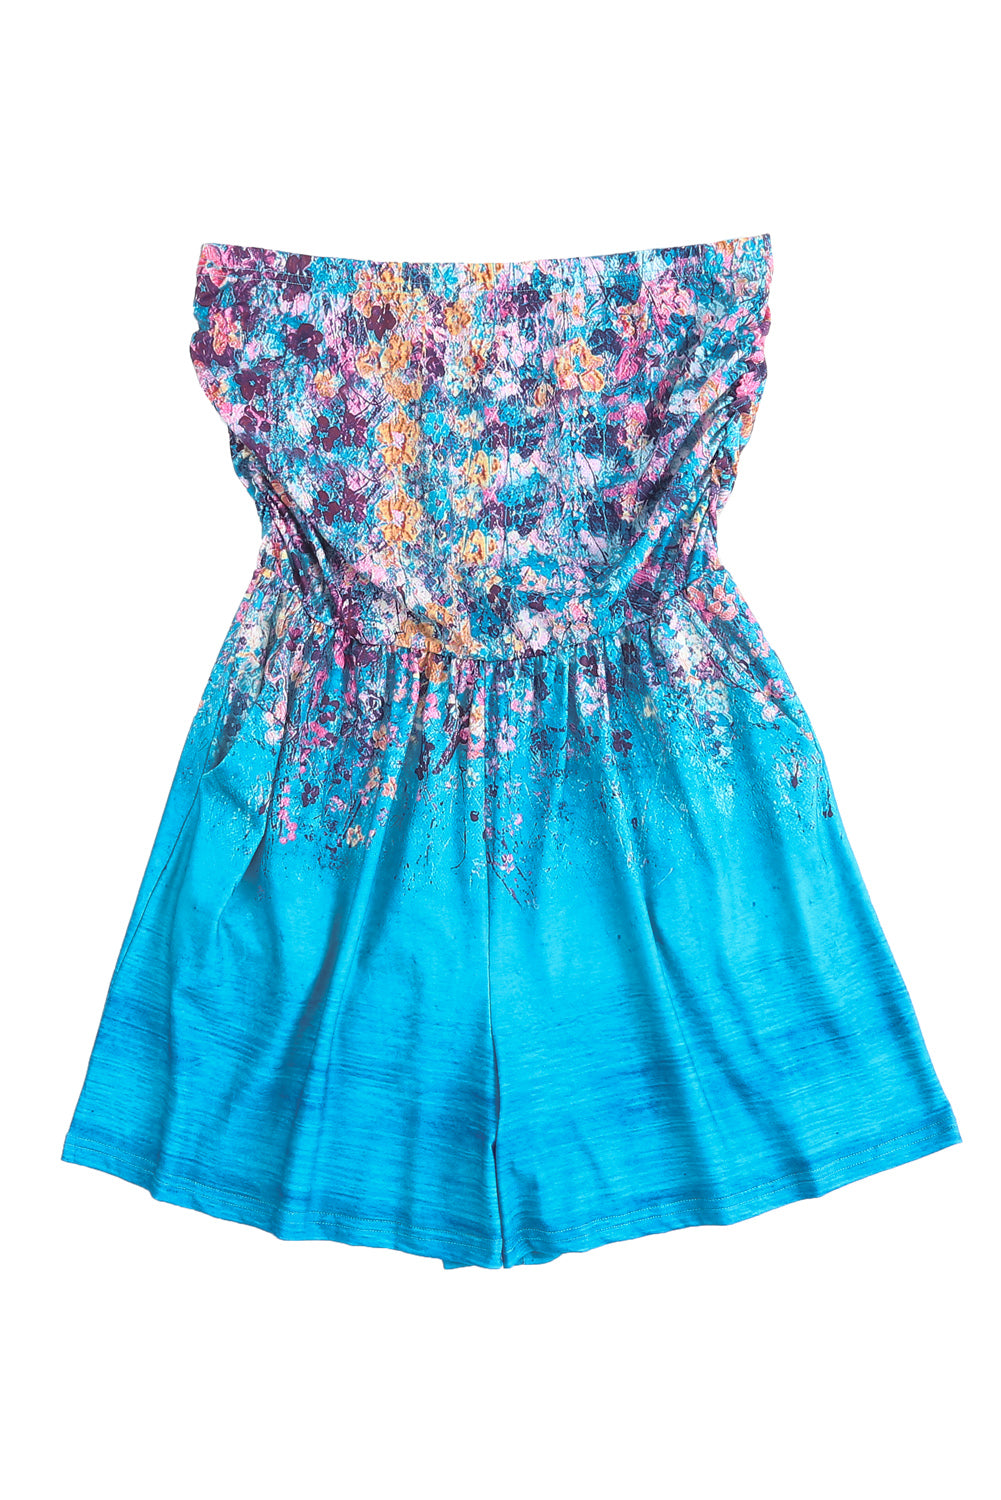 LC642083-4-S, LC642083-4-M, LC642083-4-L, LC642083-4-XL, Sky Blue  Floral Print Bandeau Romper with Pockets Gay Palm Leaves Print Bandeau Romper with Pockets Multicolor Tie-dye Print Bandeau Romper with Pockets